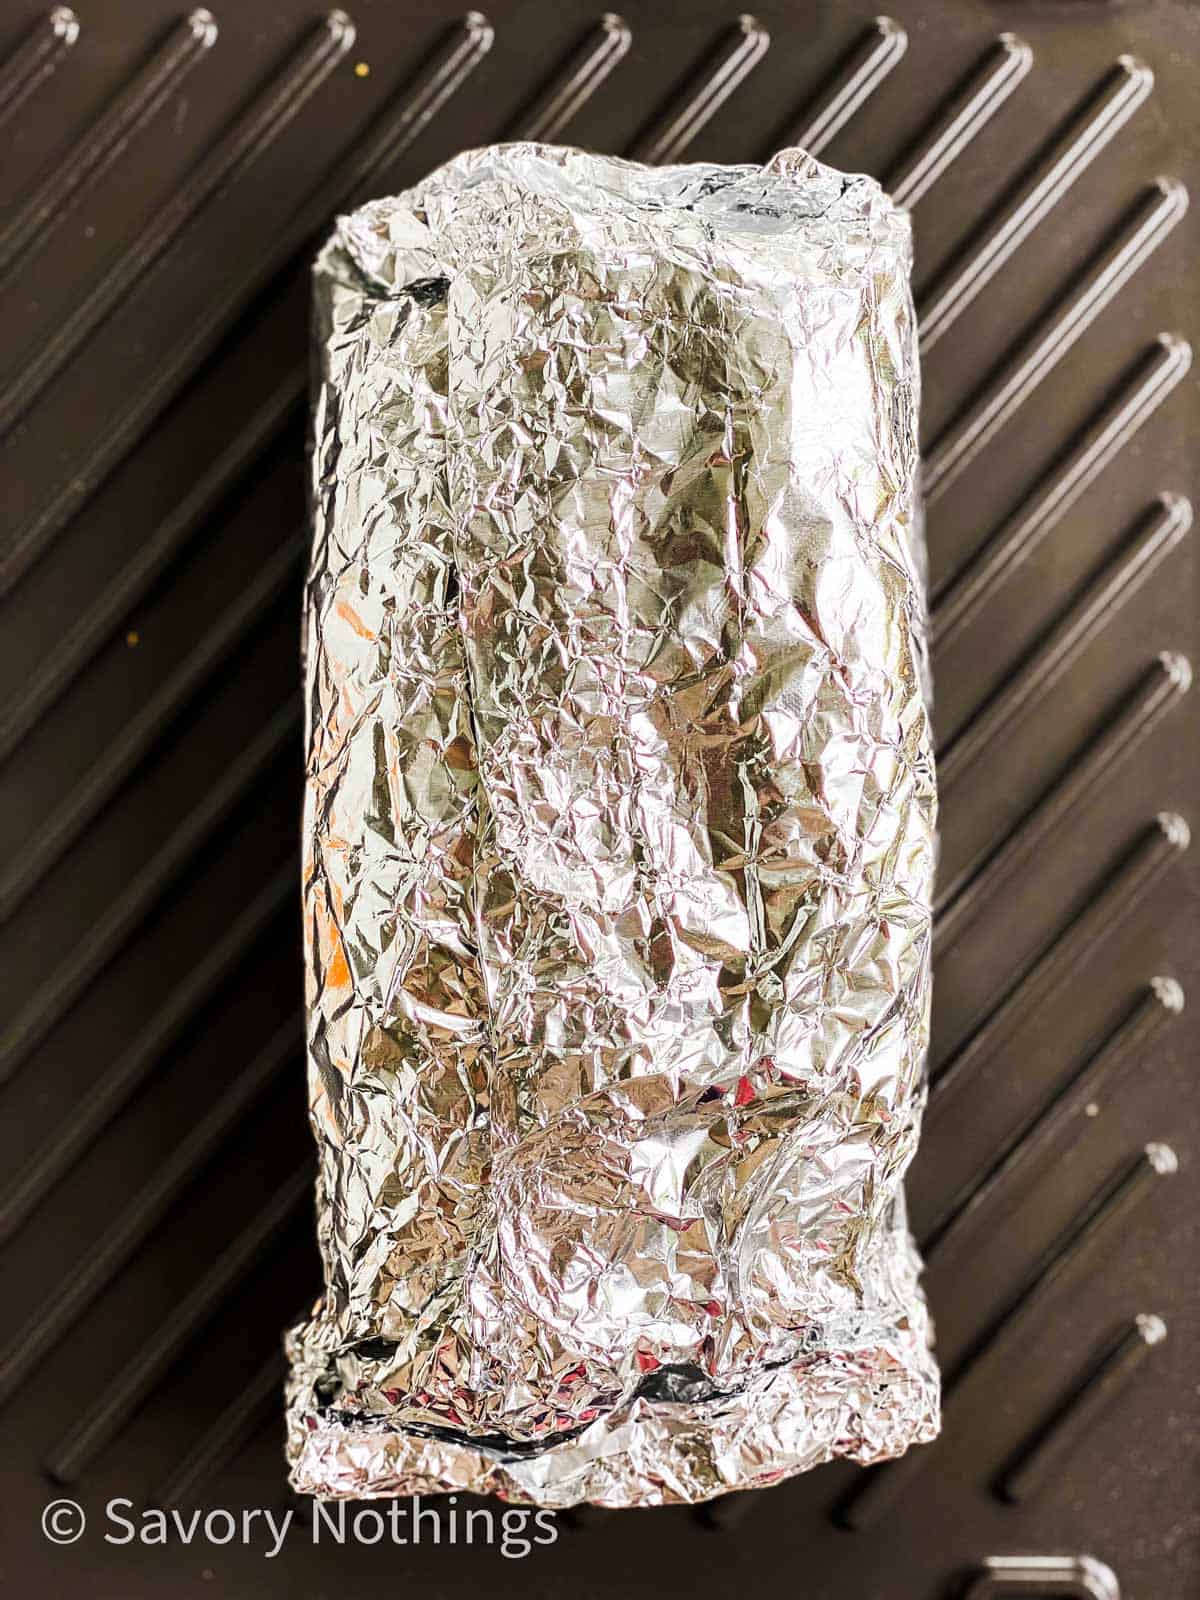 foil packet on grill